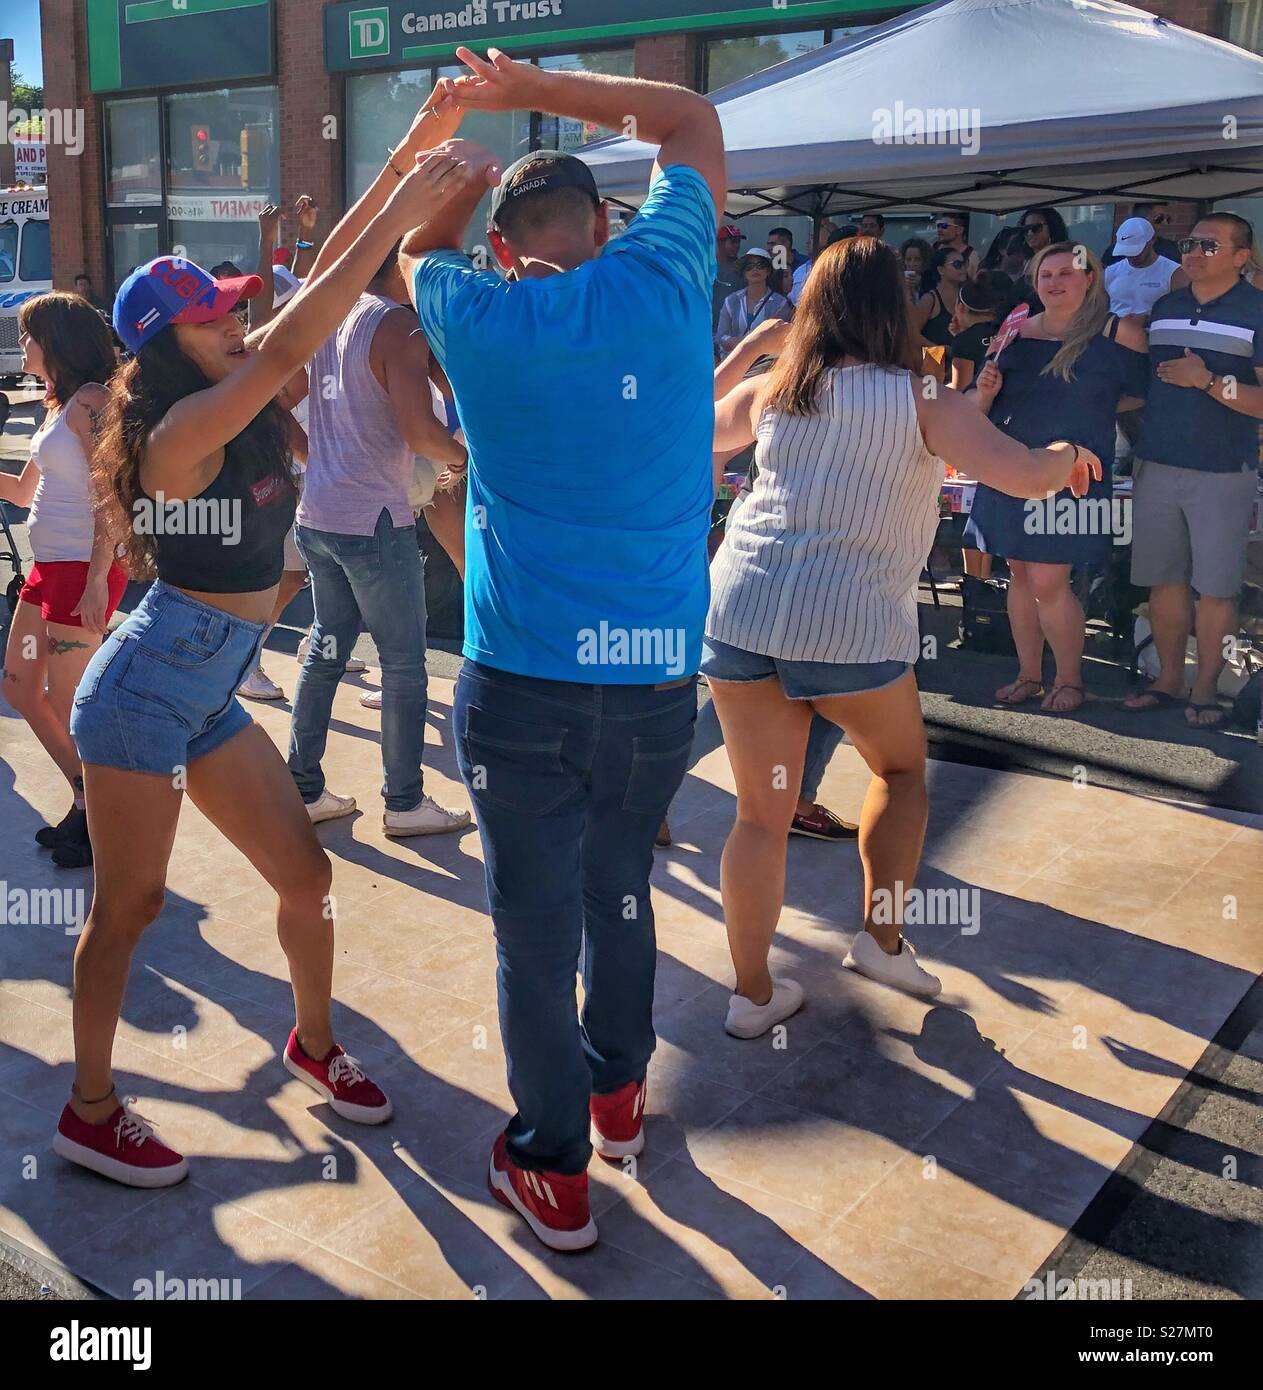 People dancing at a Salsa Festival in Toronto, Canada. Stock Photo